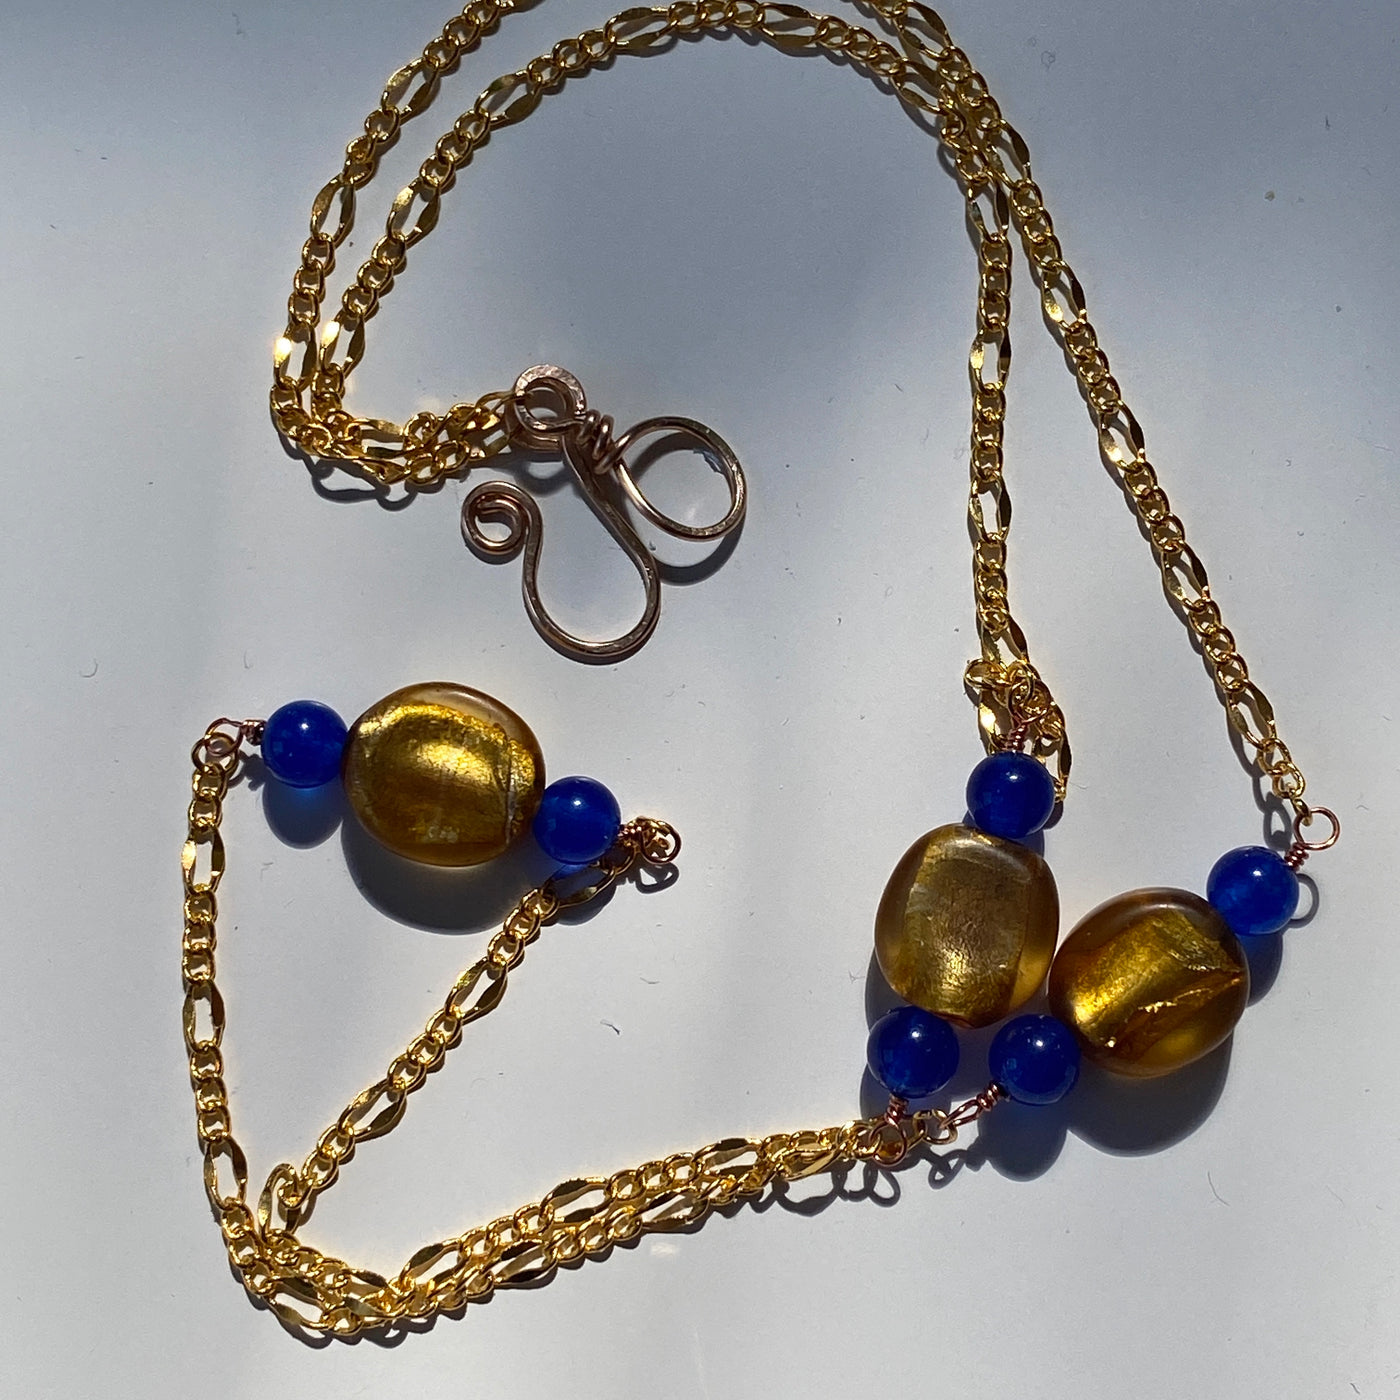 Golden glass beads and blue calchedony necklace.